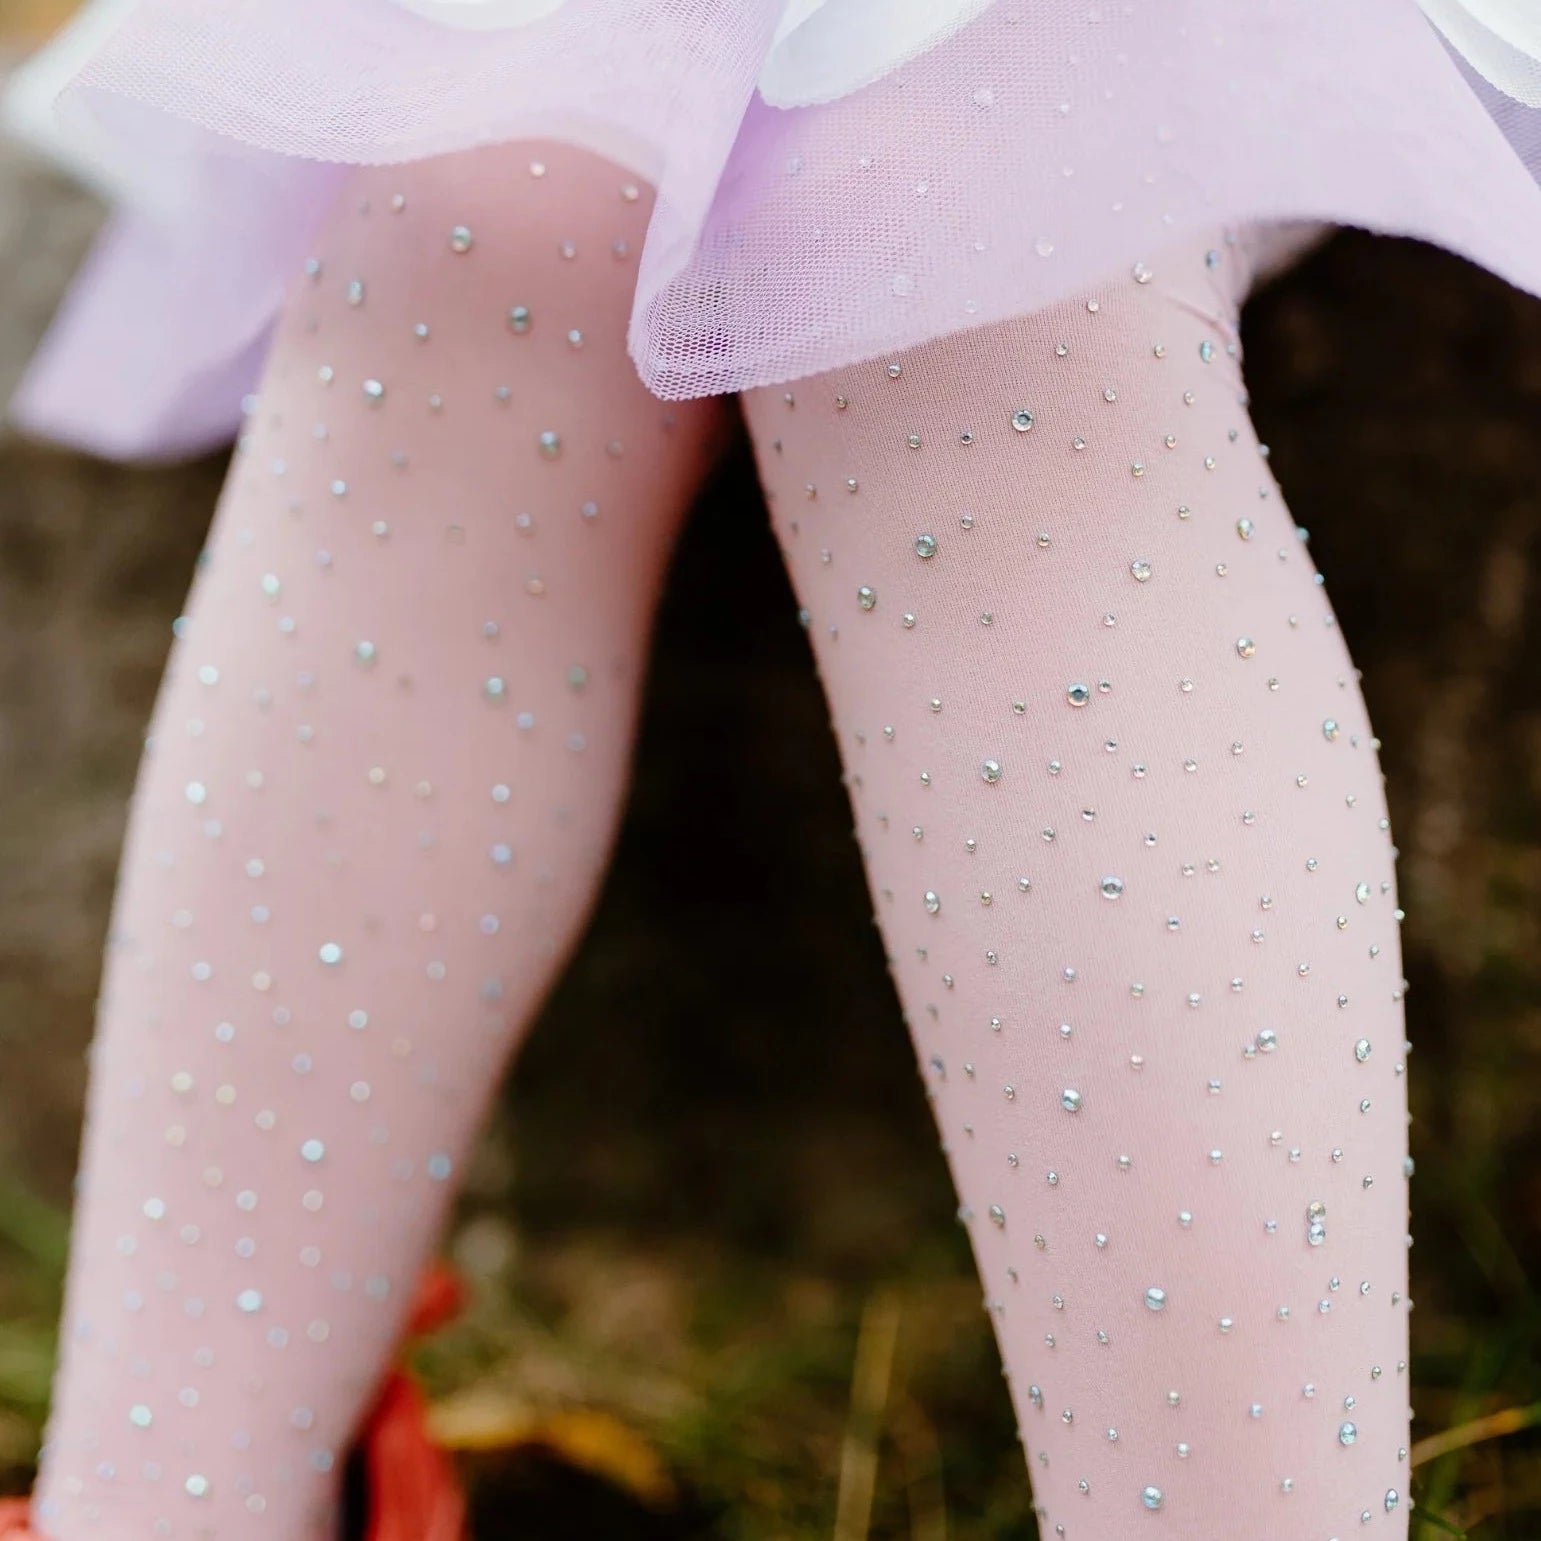 Ombre Rhinestone Tights Sizes 3-8 Yrs